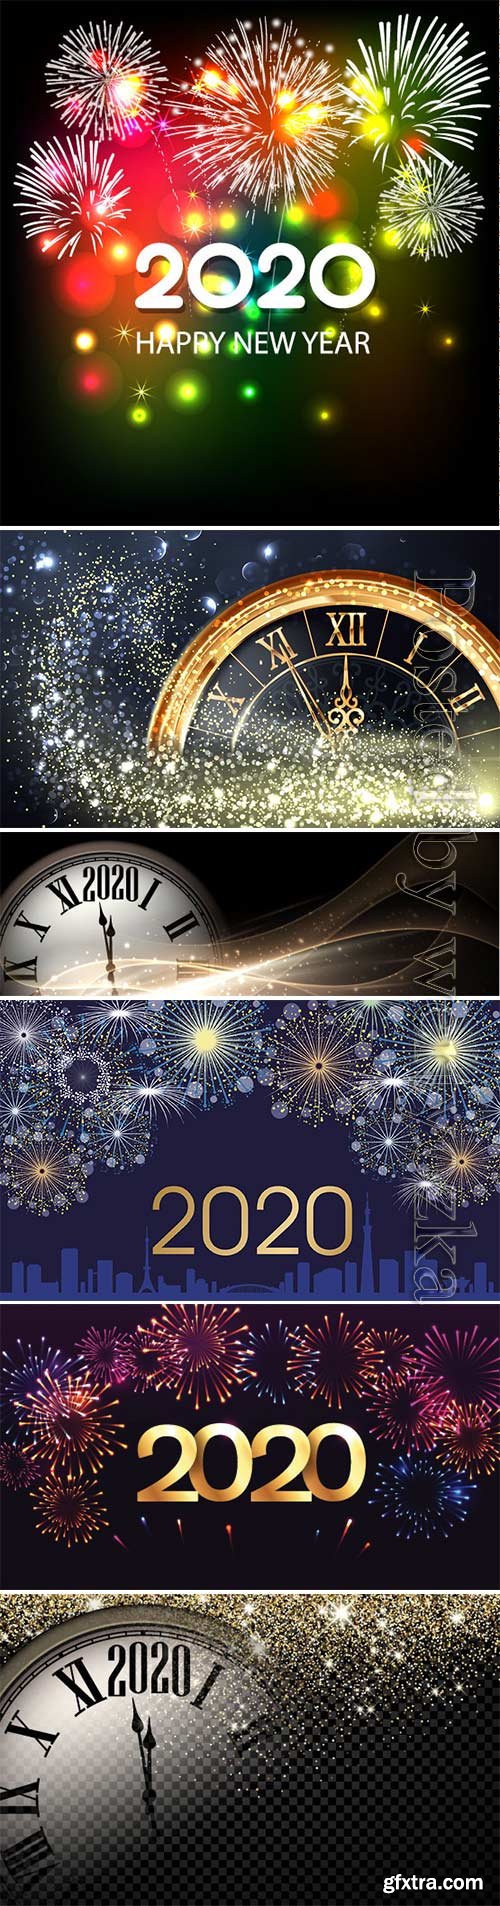 New Year 2020 golden and color vector fireworks